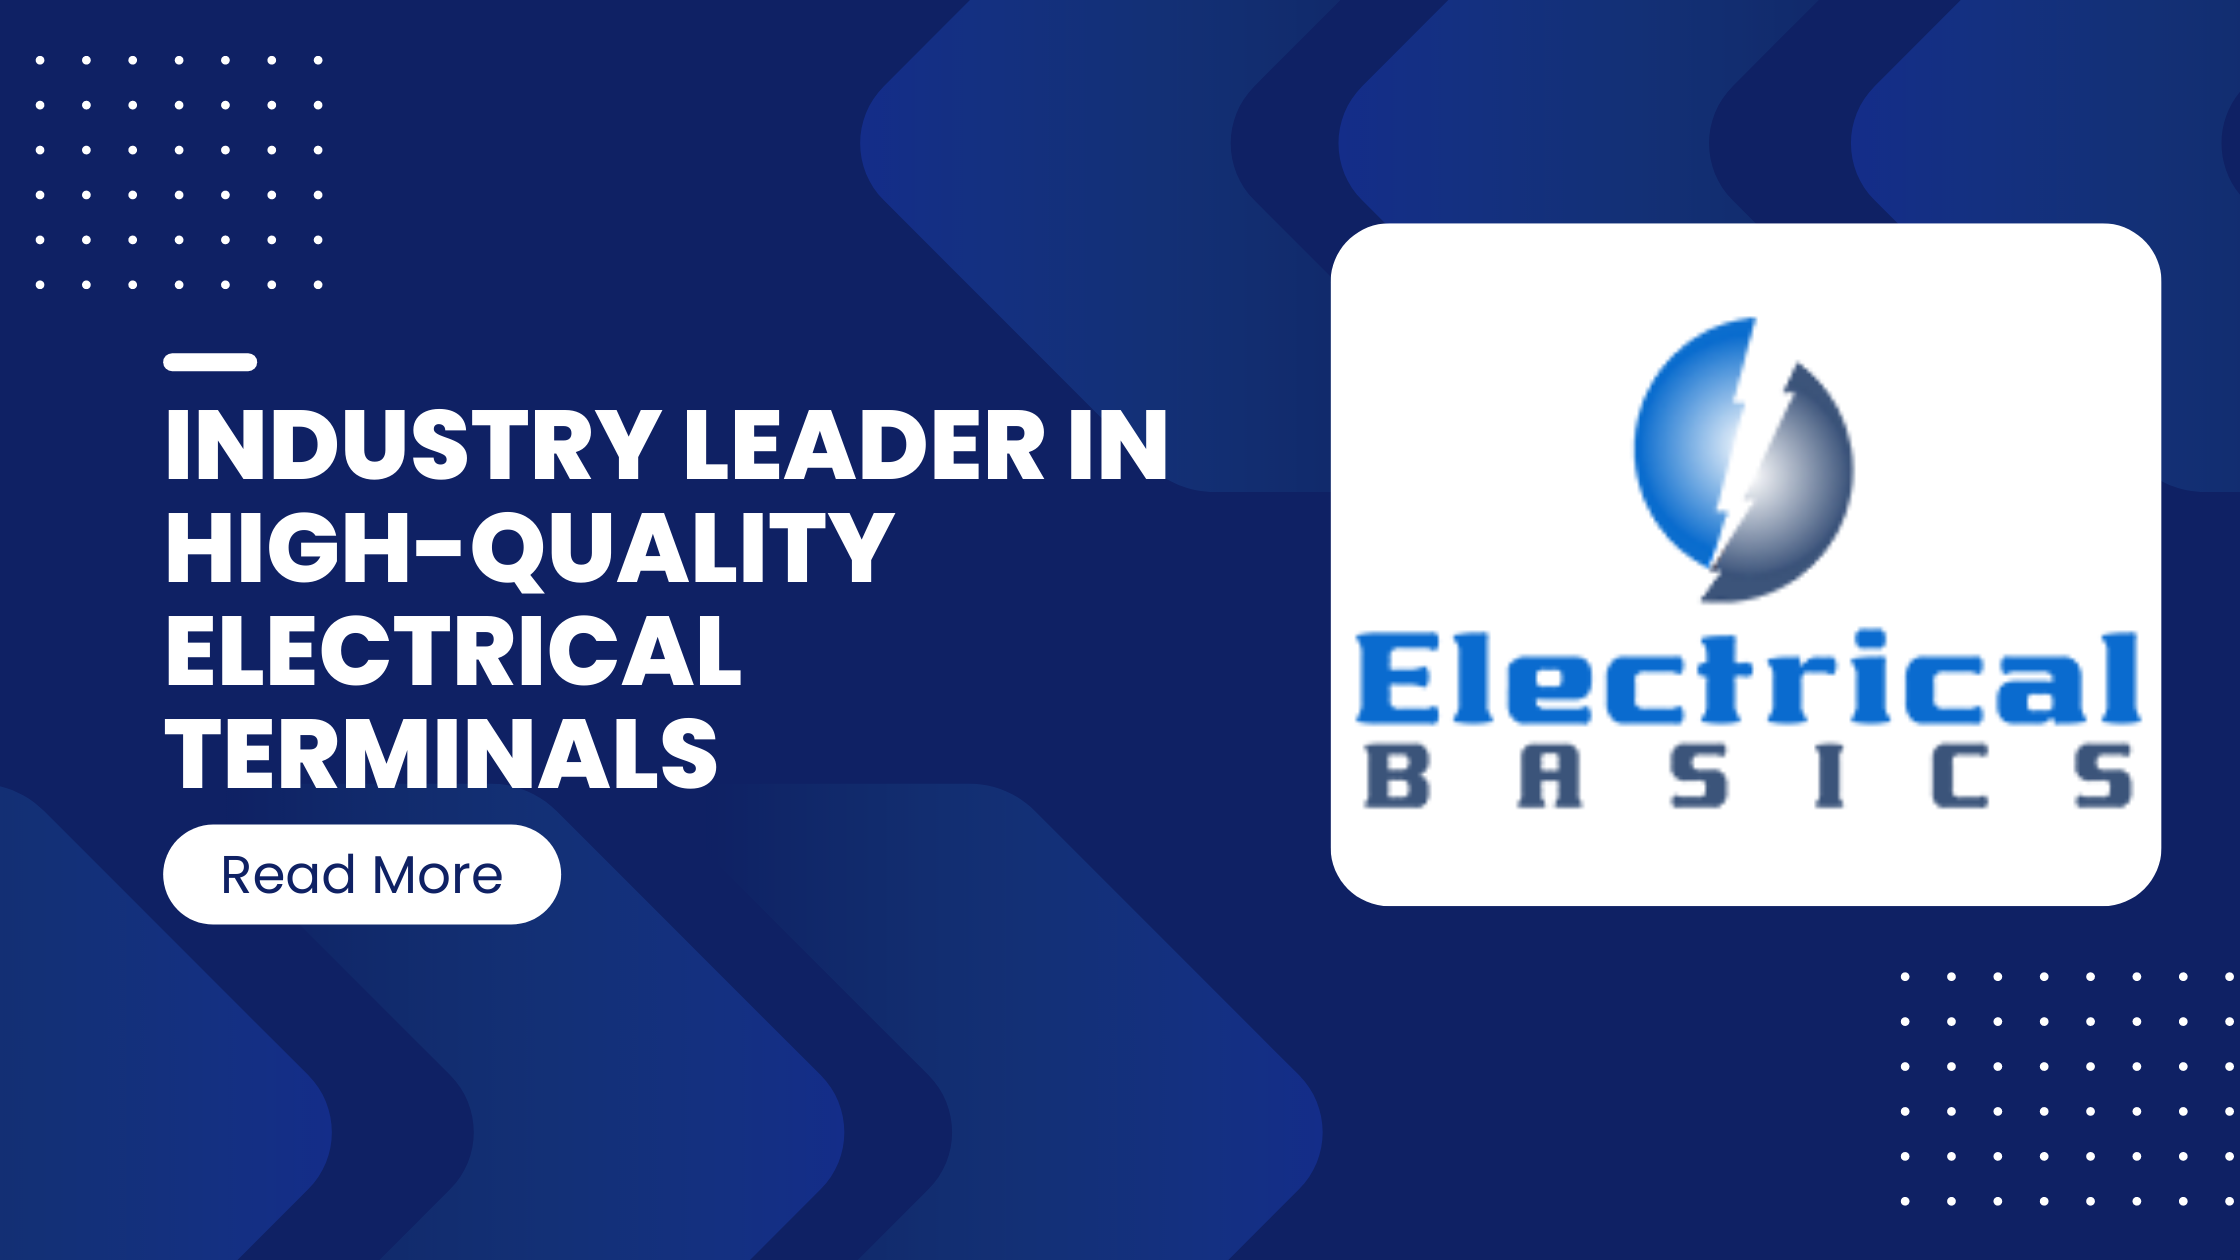 Electrical Basics A Leading Provider of Superior Quality Electrical Terminals